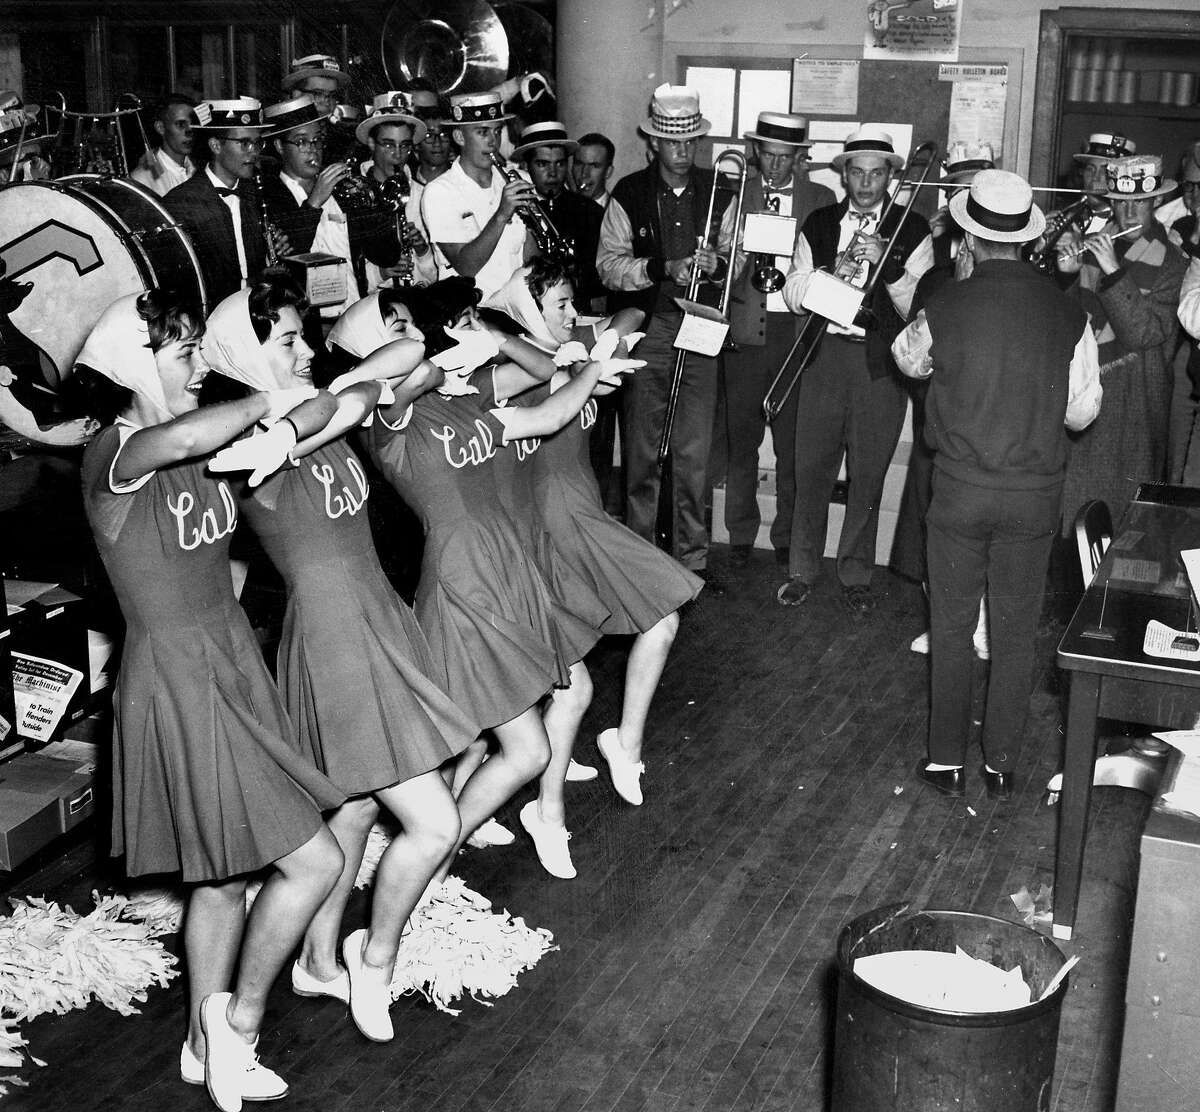 Nov. 23, 1961: The UC Berkeley marching band and cheerleaders perform in the San Francisco Chronicle newsroom in 1961.